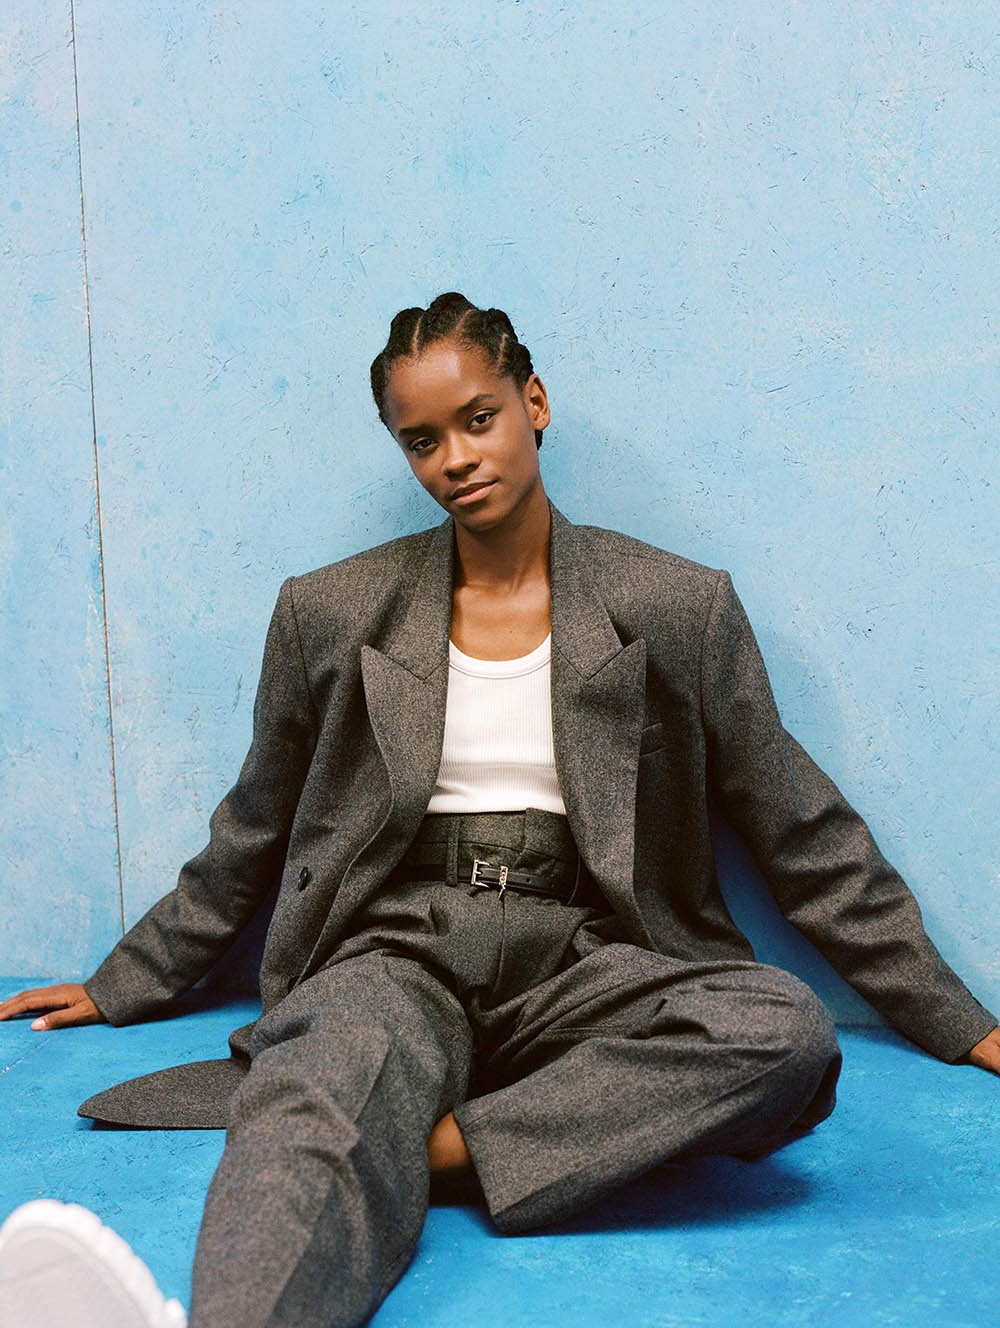 Letitia Wright covers Porter Magazine October 19th, 2020 by Ekua King